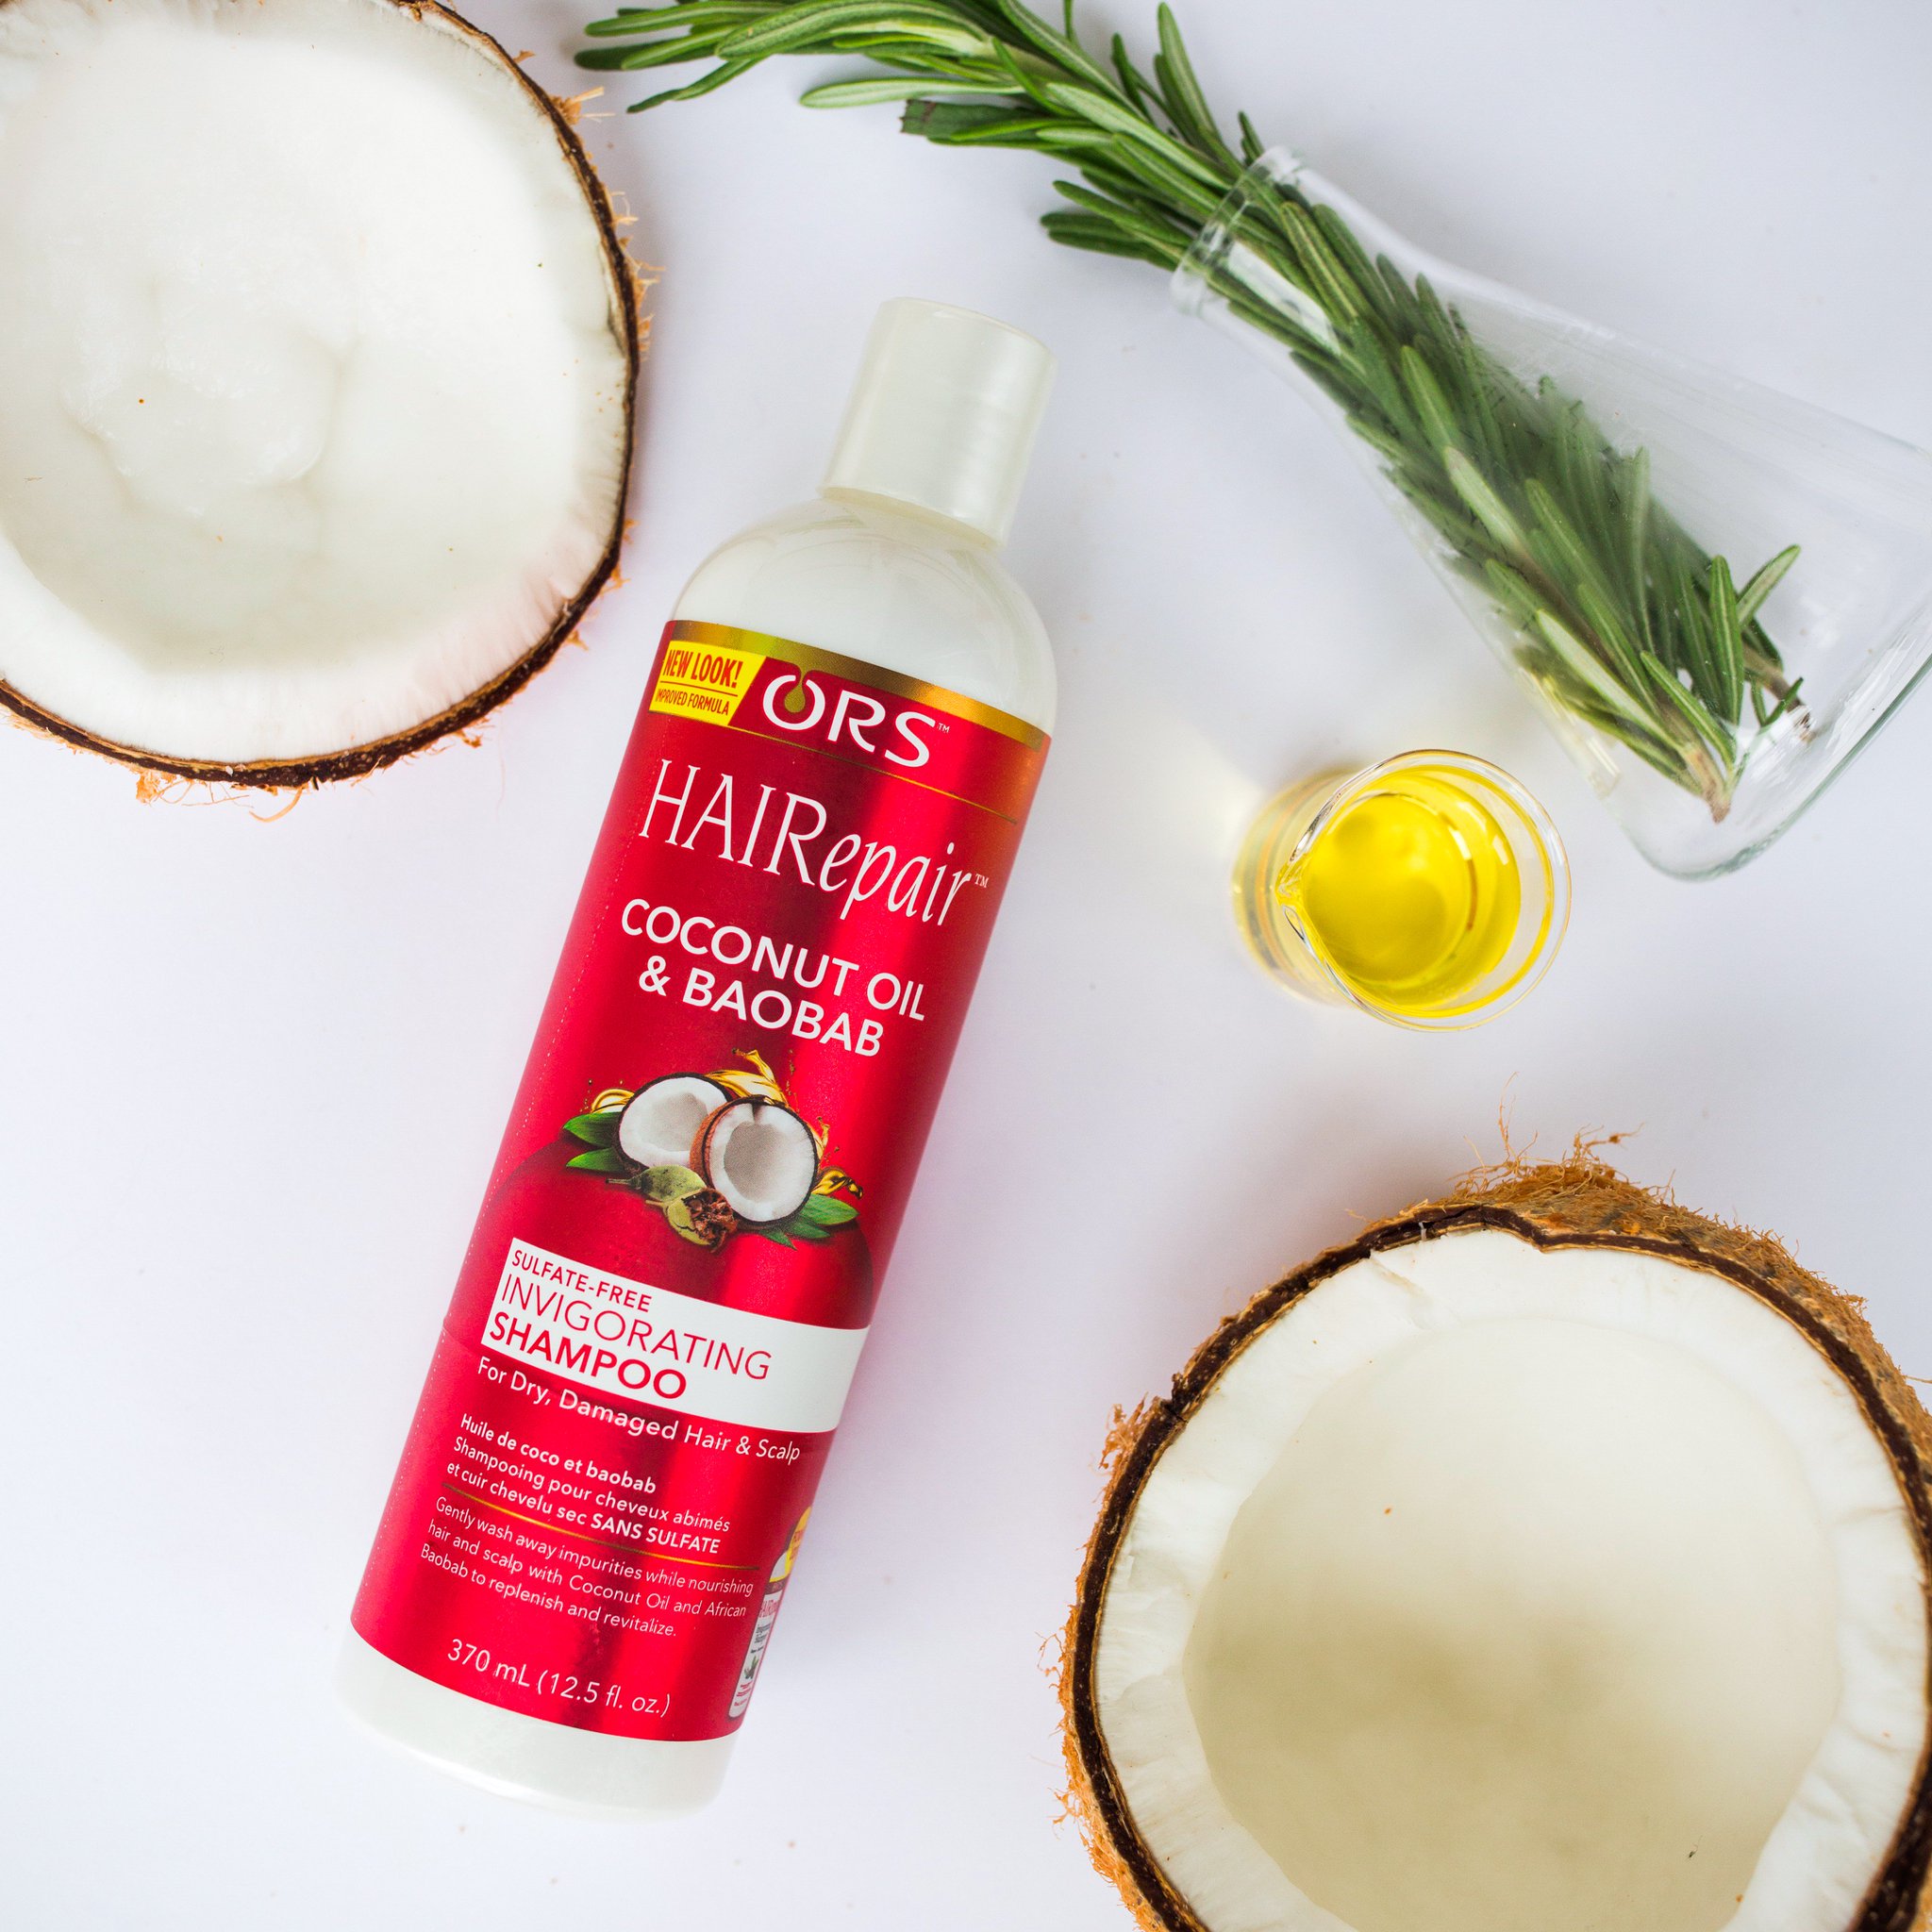 Ors Hair Care On Twitter Lather Rich Sulfate Free And With A Decadent Coconut Scent Hairepair Invigorating Shampoo Is One Of Our Favs It Gently Cleanses Invigorates While Helping To Revive Damaged Hair